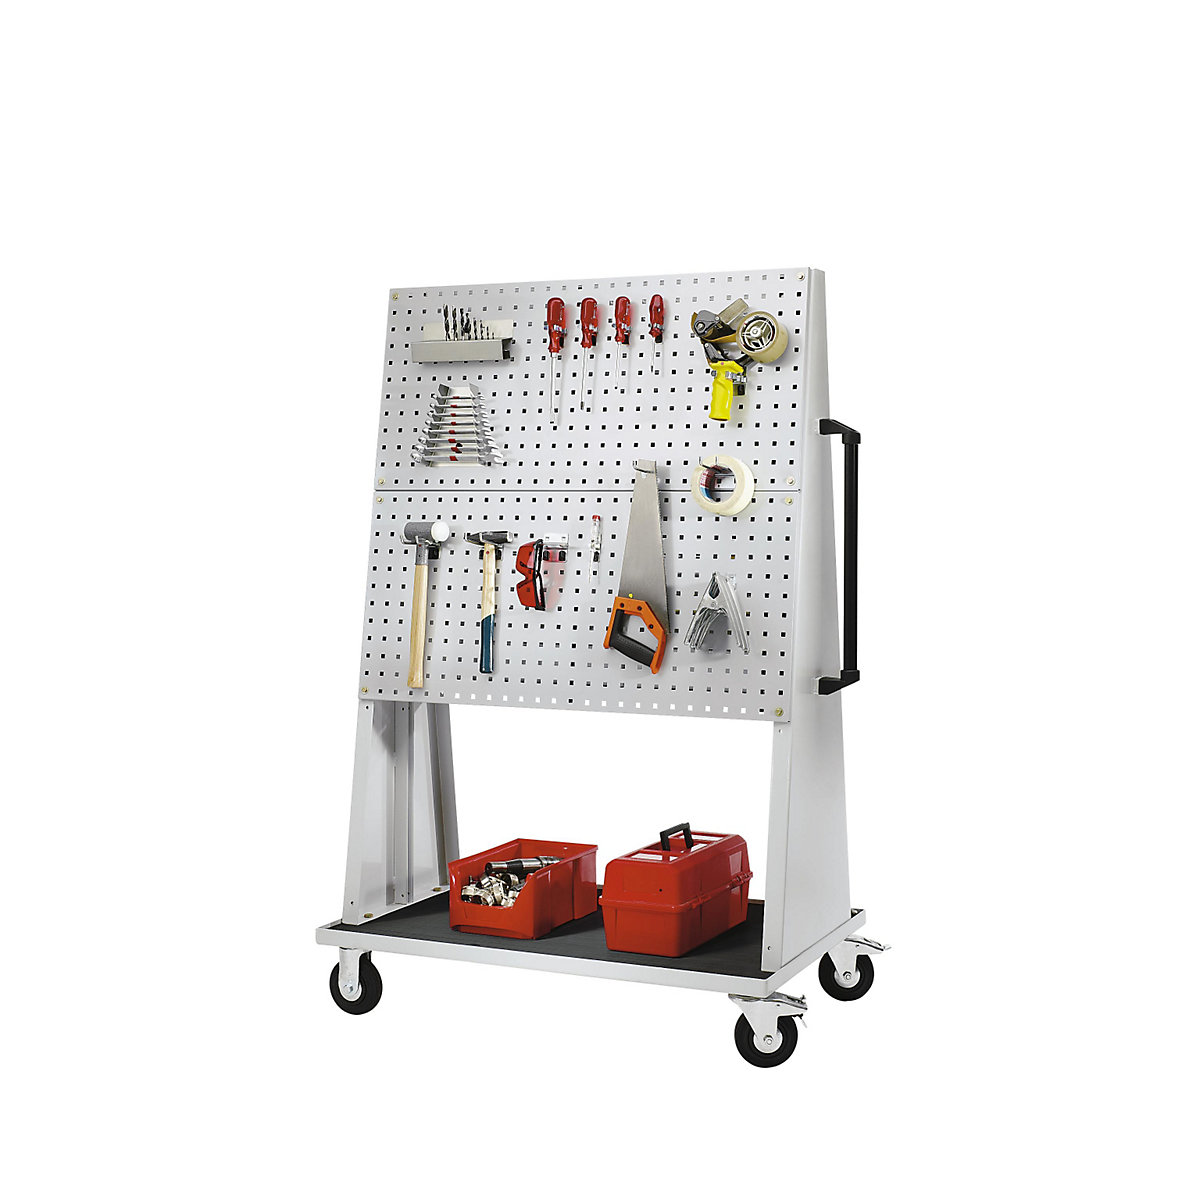 Perforated panel made of steel for tool trolley – eurokraft pro